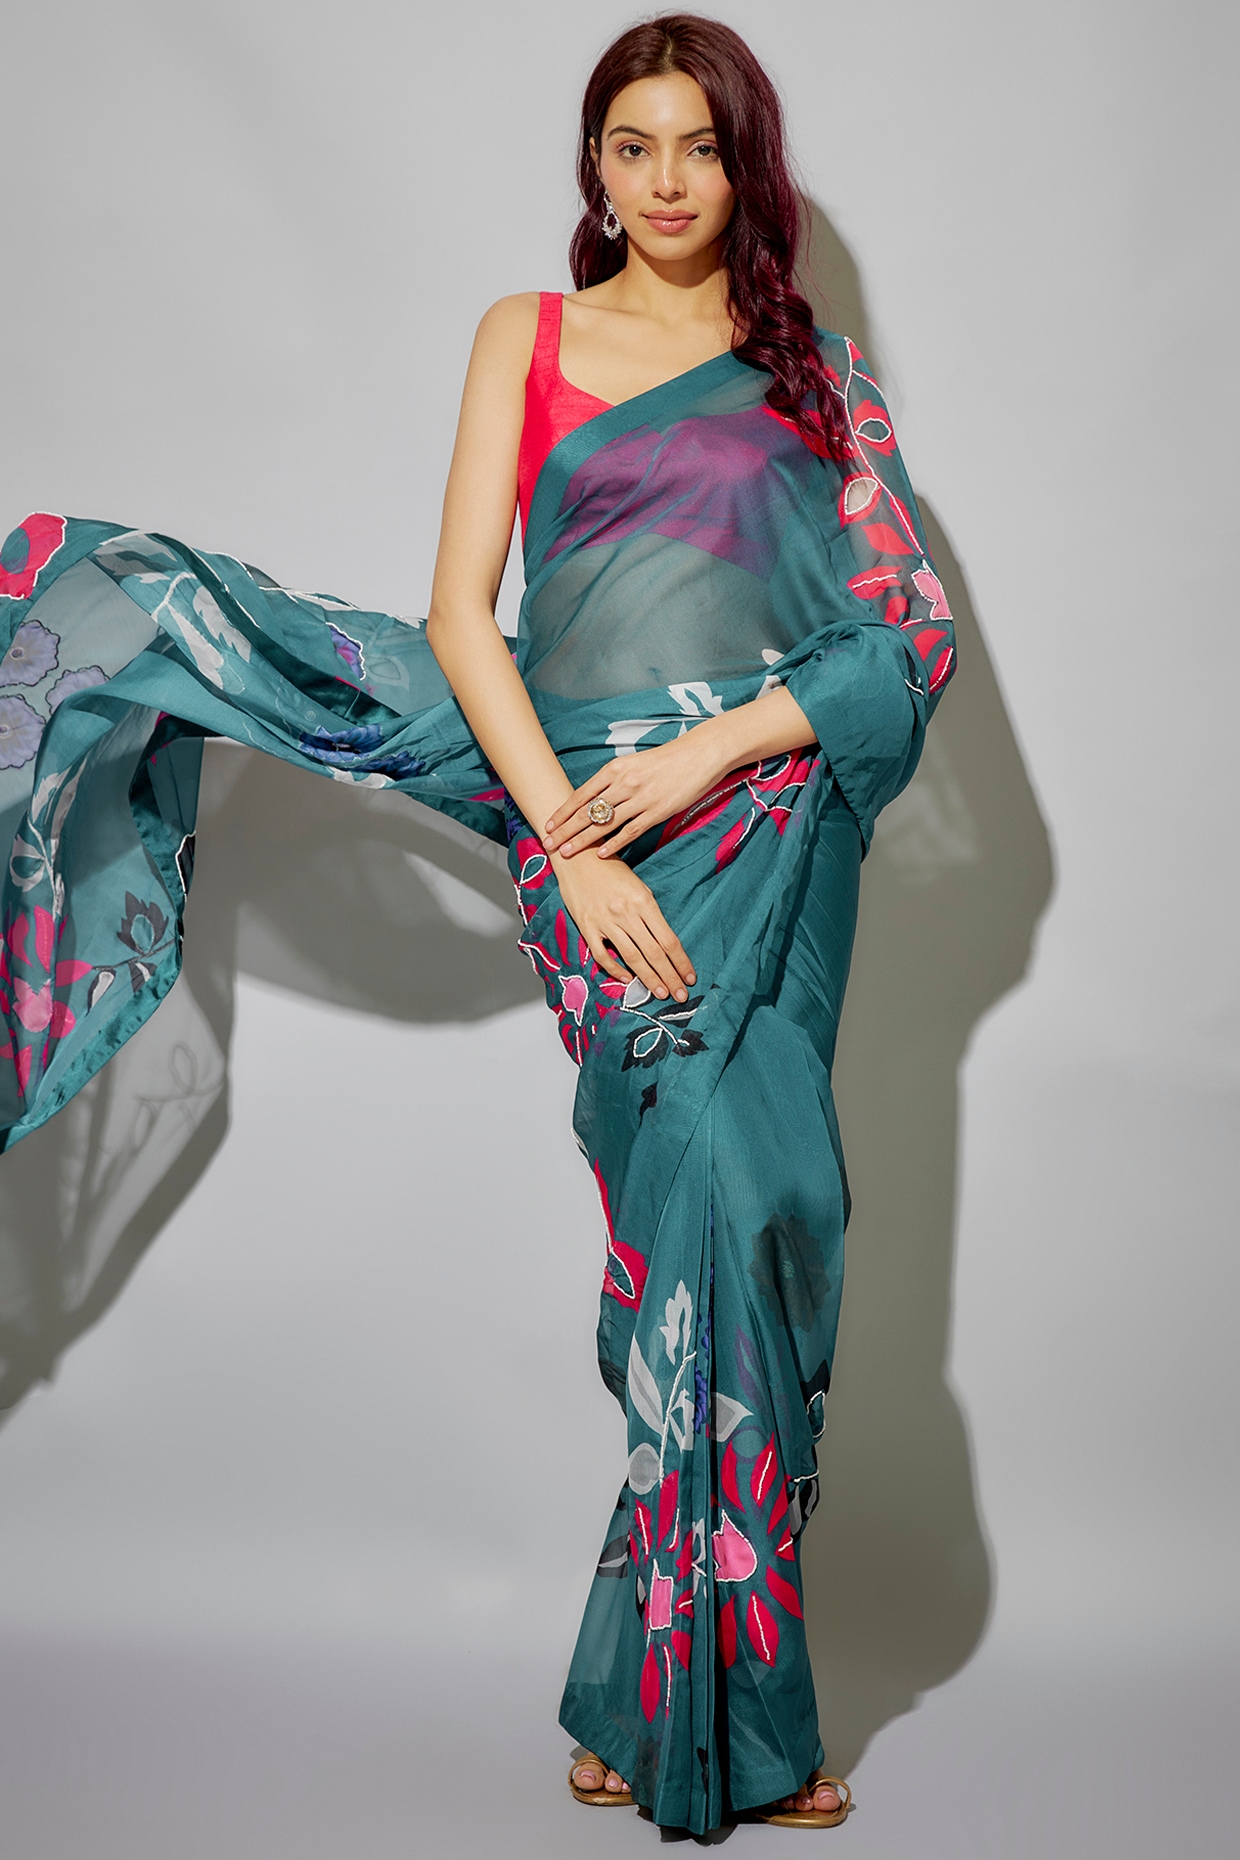 KRISHNA VOL-5 SERIES 1001 TO 1008 SAREE BY KASHVI DESIGNER WITH PRINTED  CHIFFONE BRASSO SAREES ARE AVAILABLE AT WHOLESALE PRICE